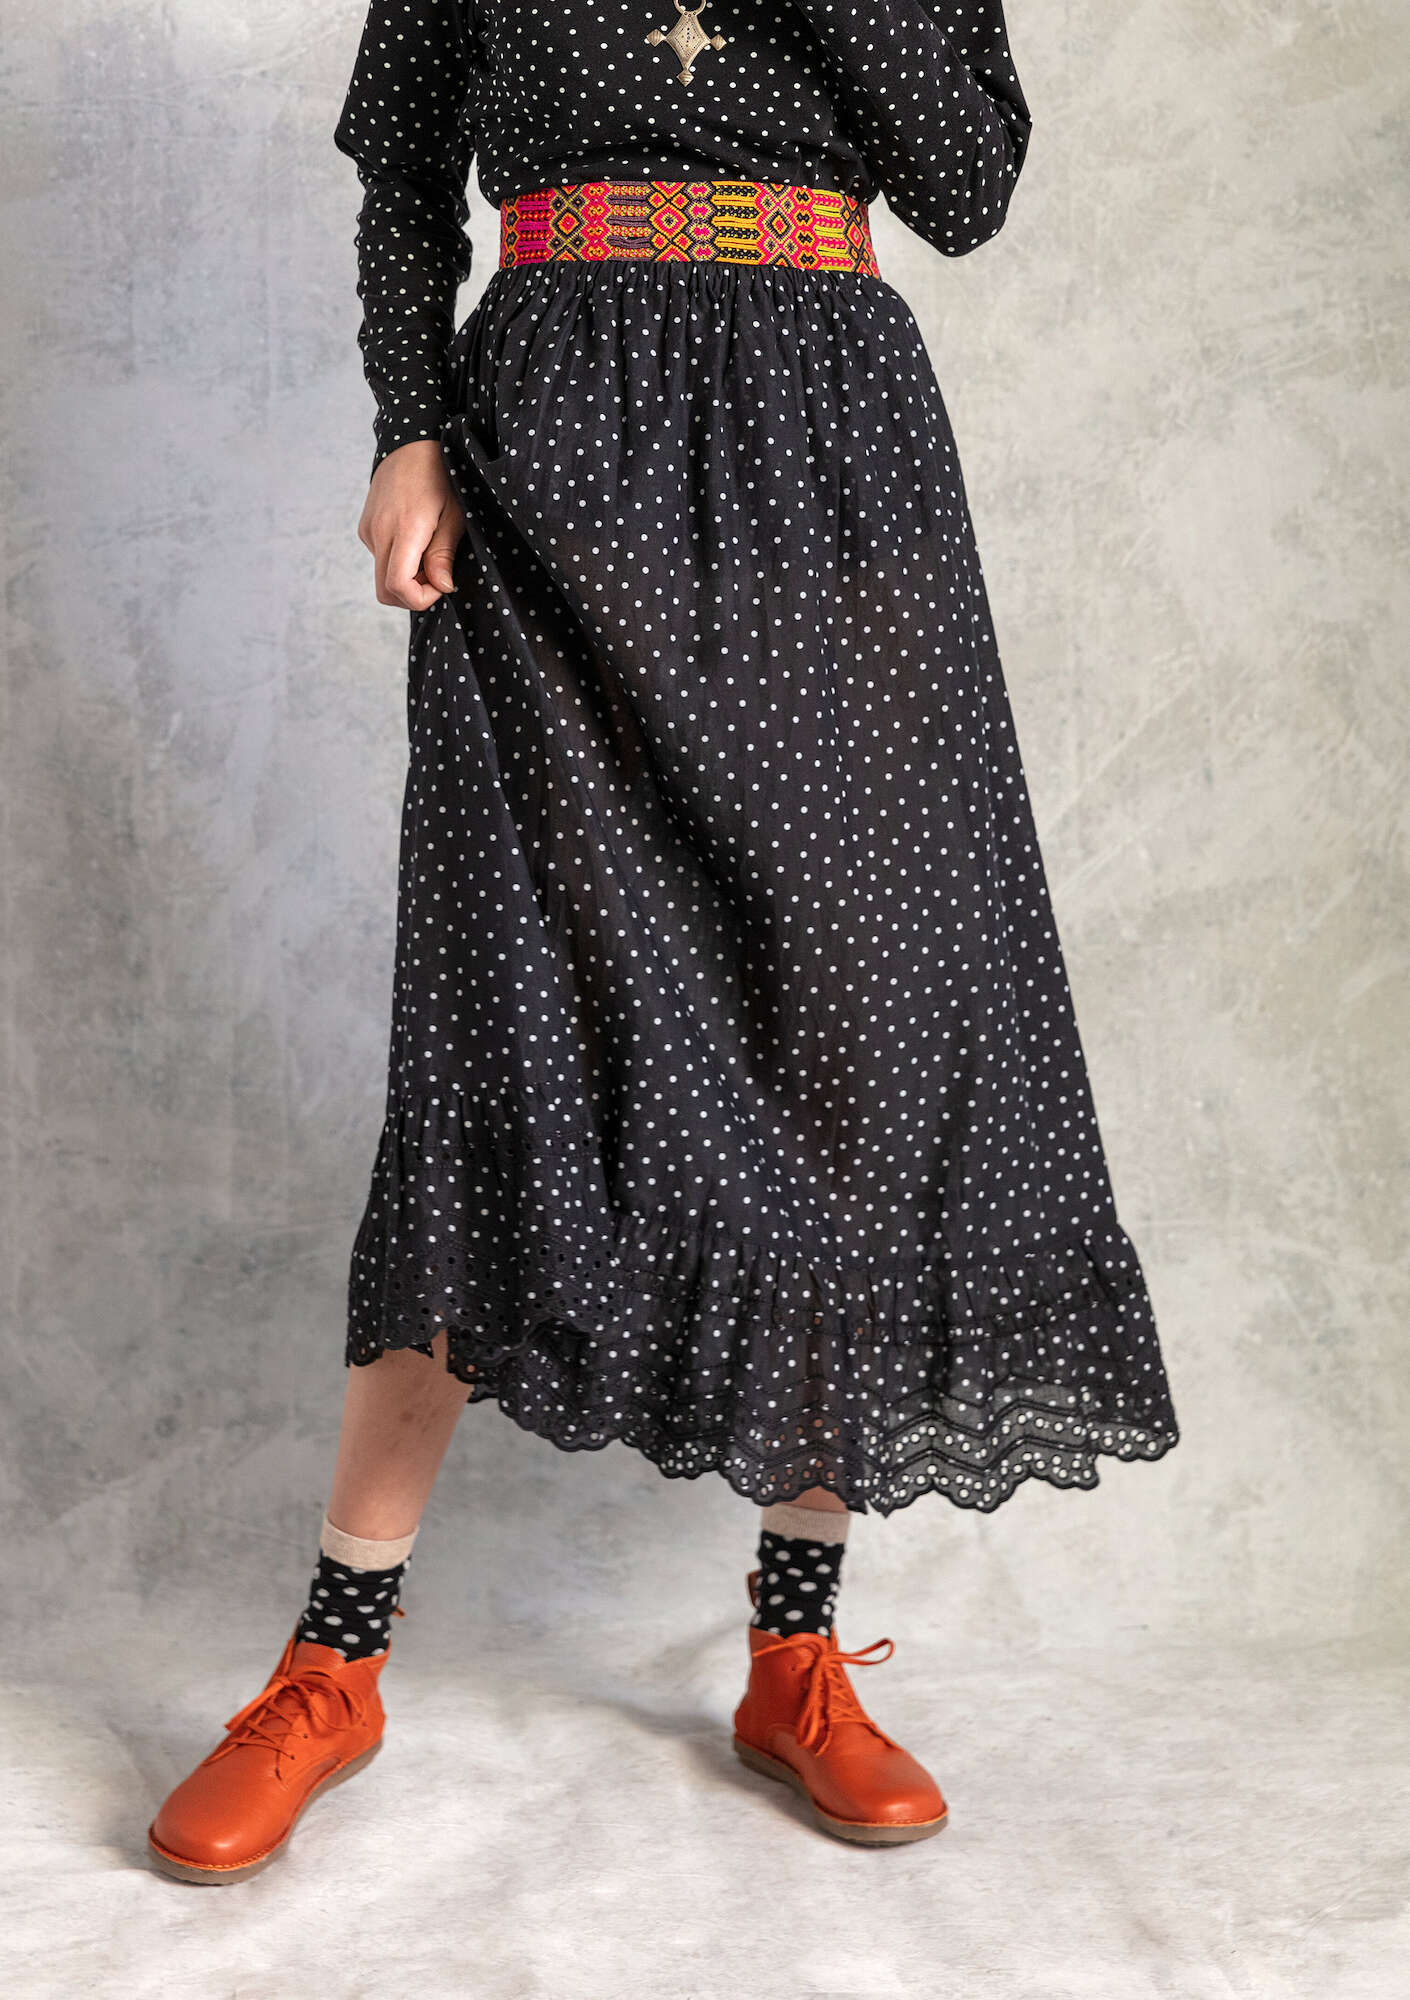 “Pytte” slip in woven organic cotton black/patterned